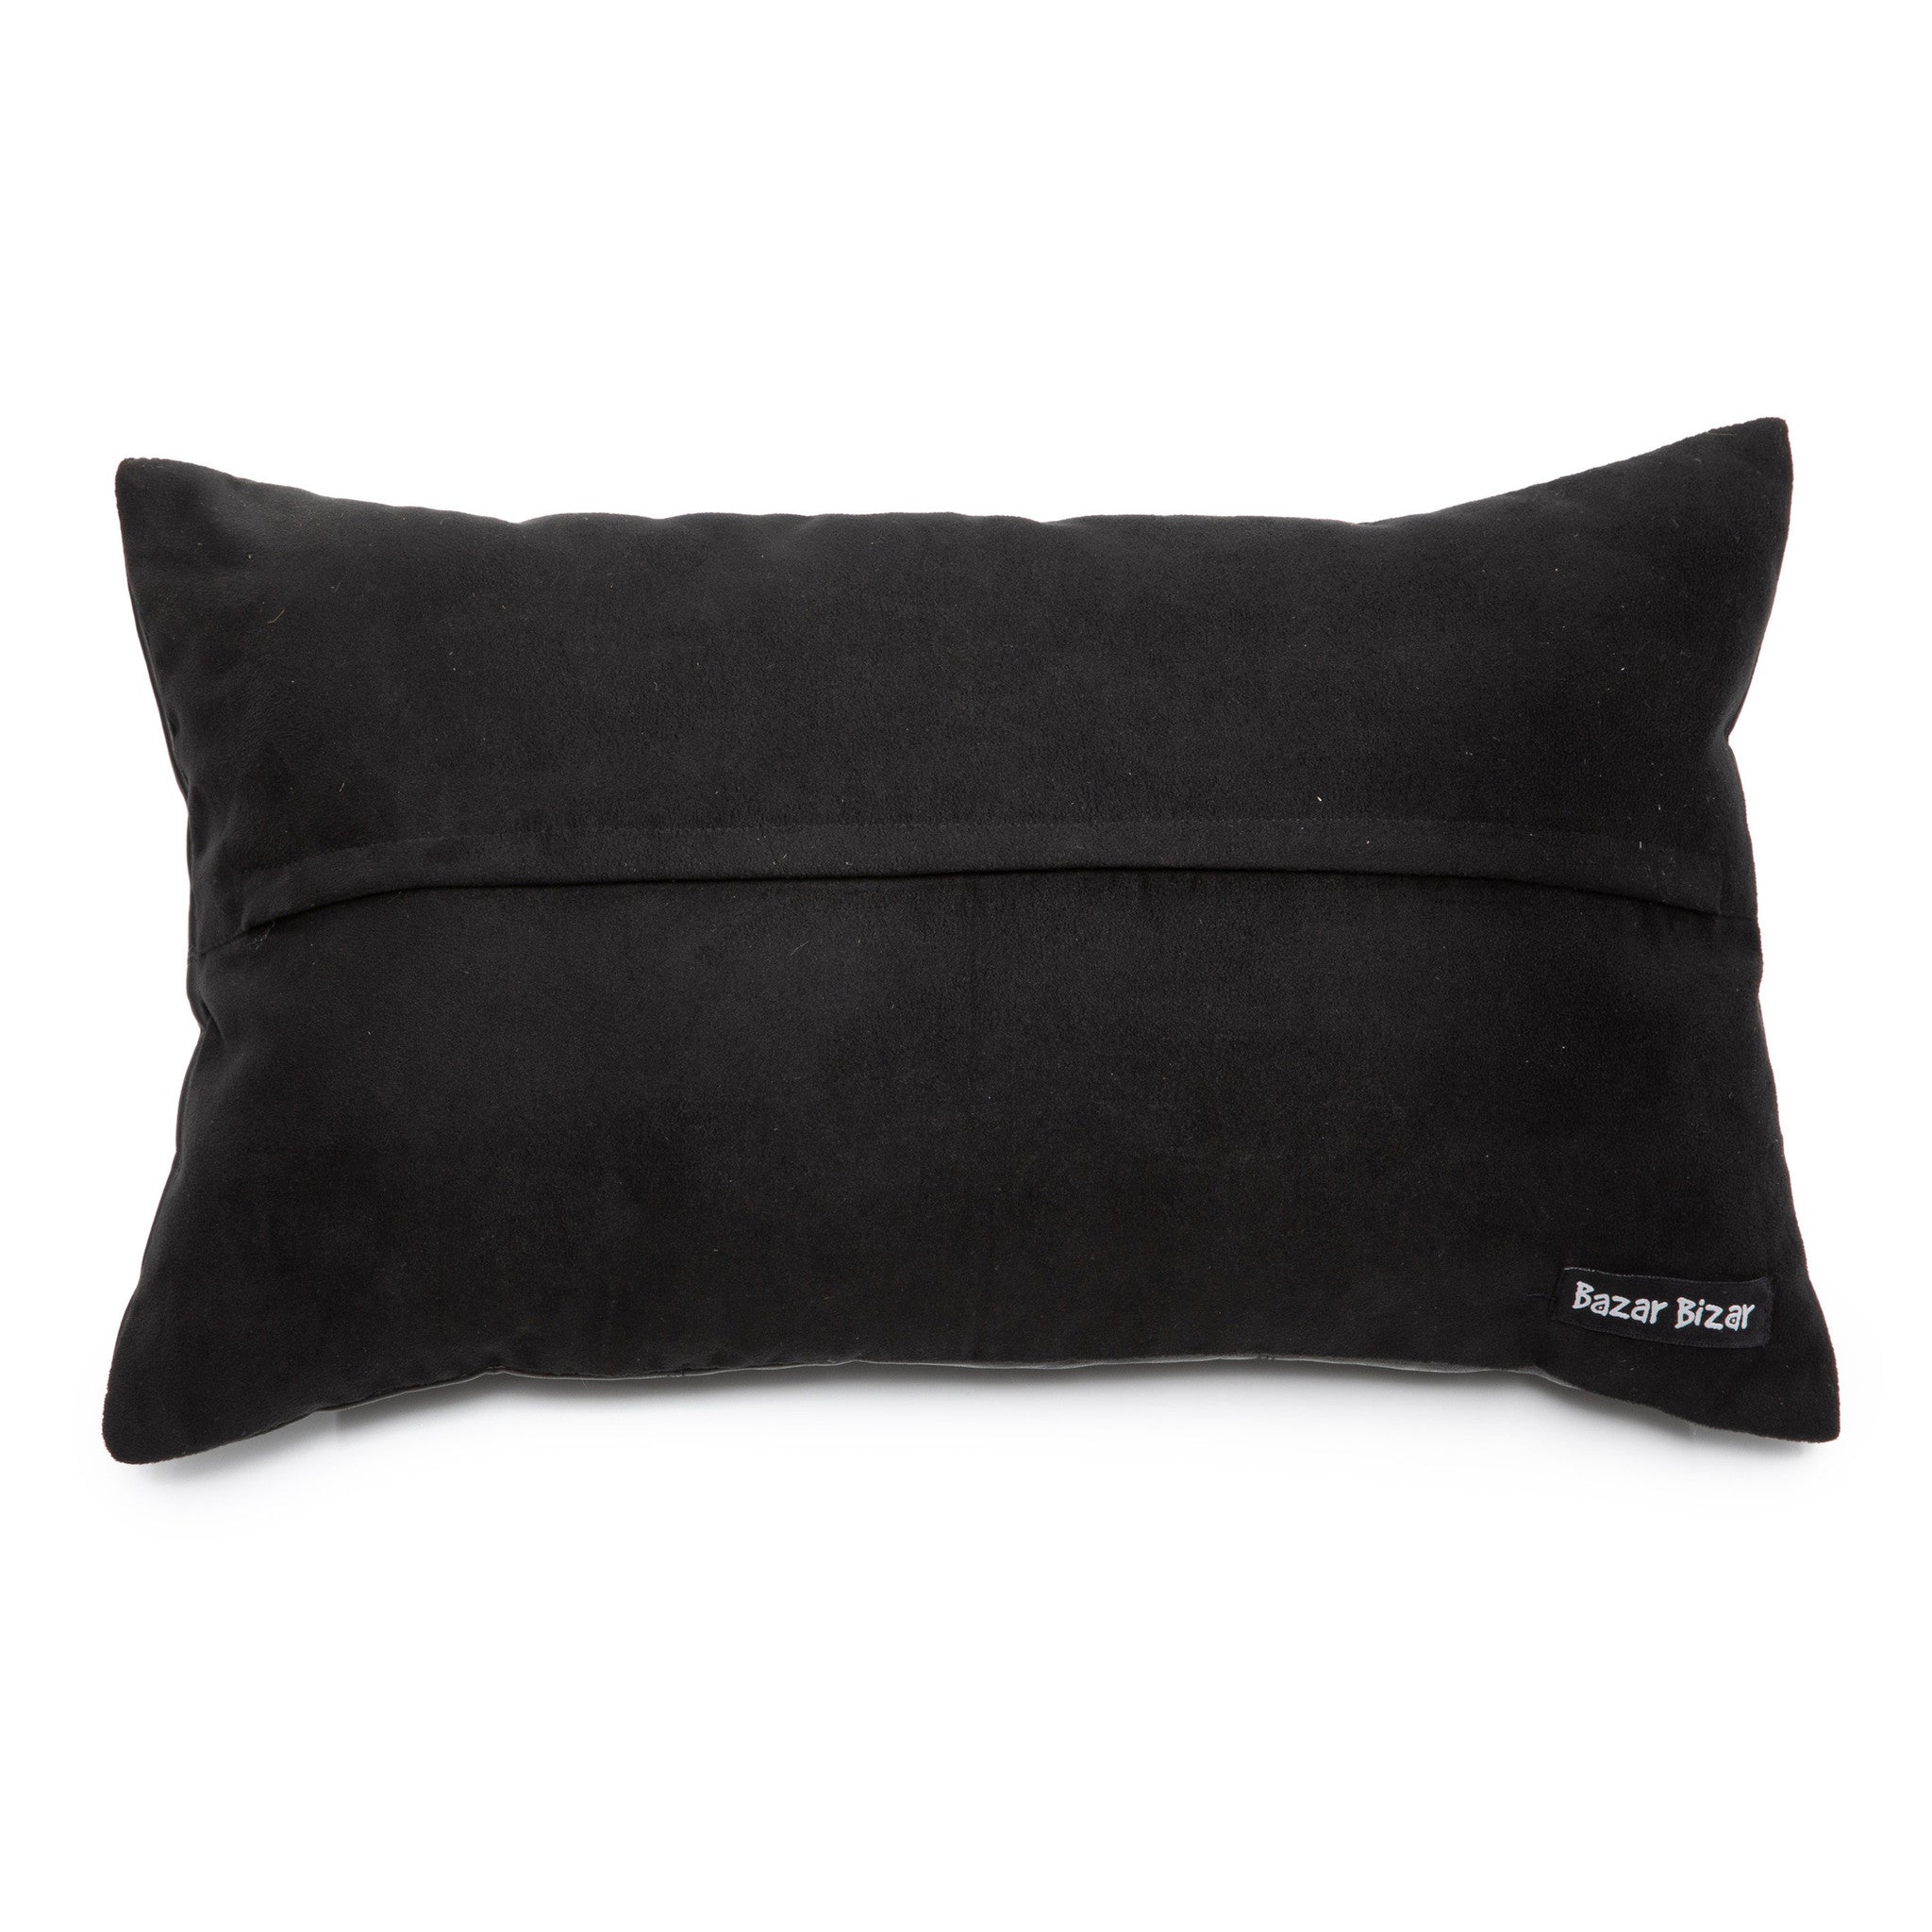 THE SIX PANEL Leather Cushion Cover Black 30x50 back side view